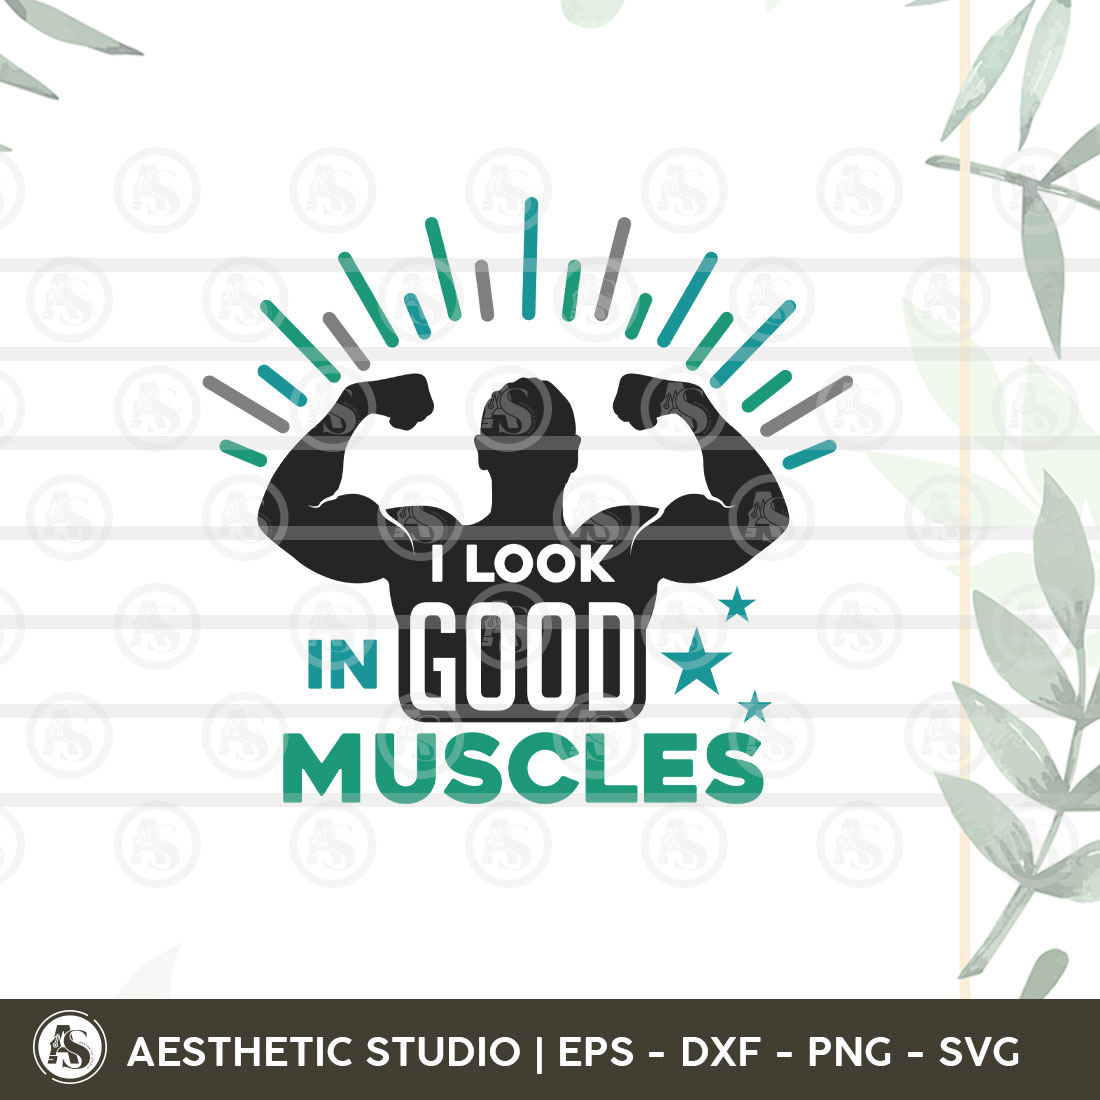 Gym Svg, I Look Good In Muscles Svg, Workout, Fitness, Weights, Gym Shirt Svg, Gift For Gym Lover, Gym Png Cut Files, Dxf, Svg, Eps cover image.